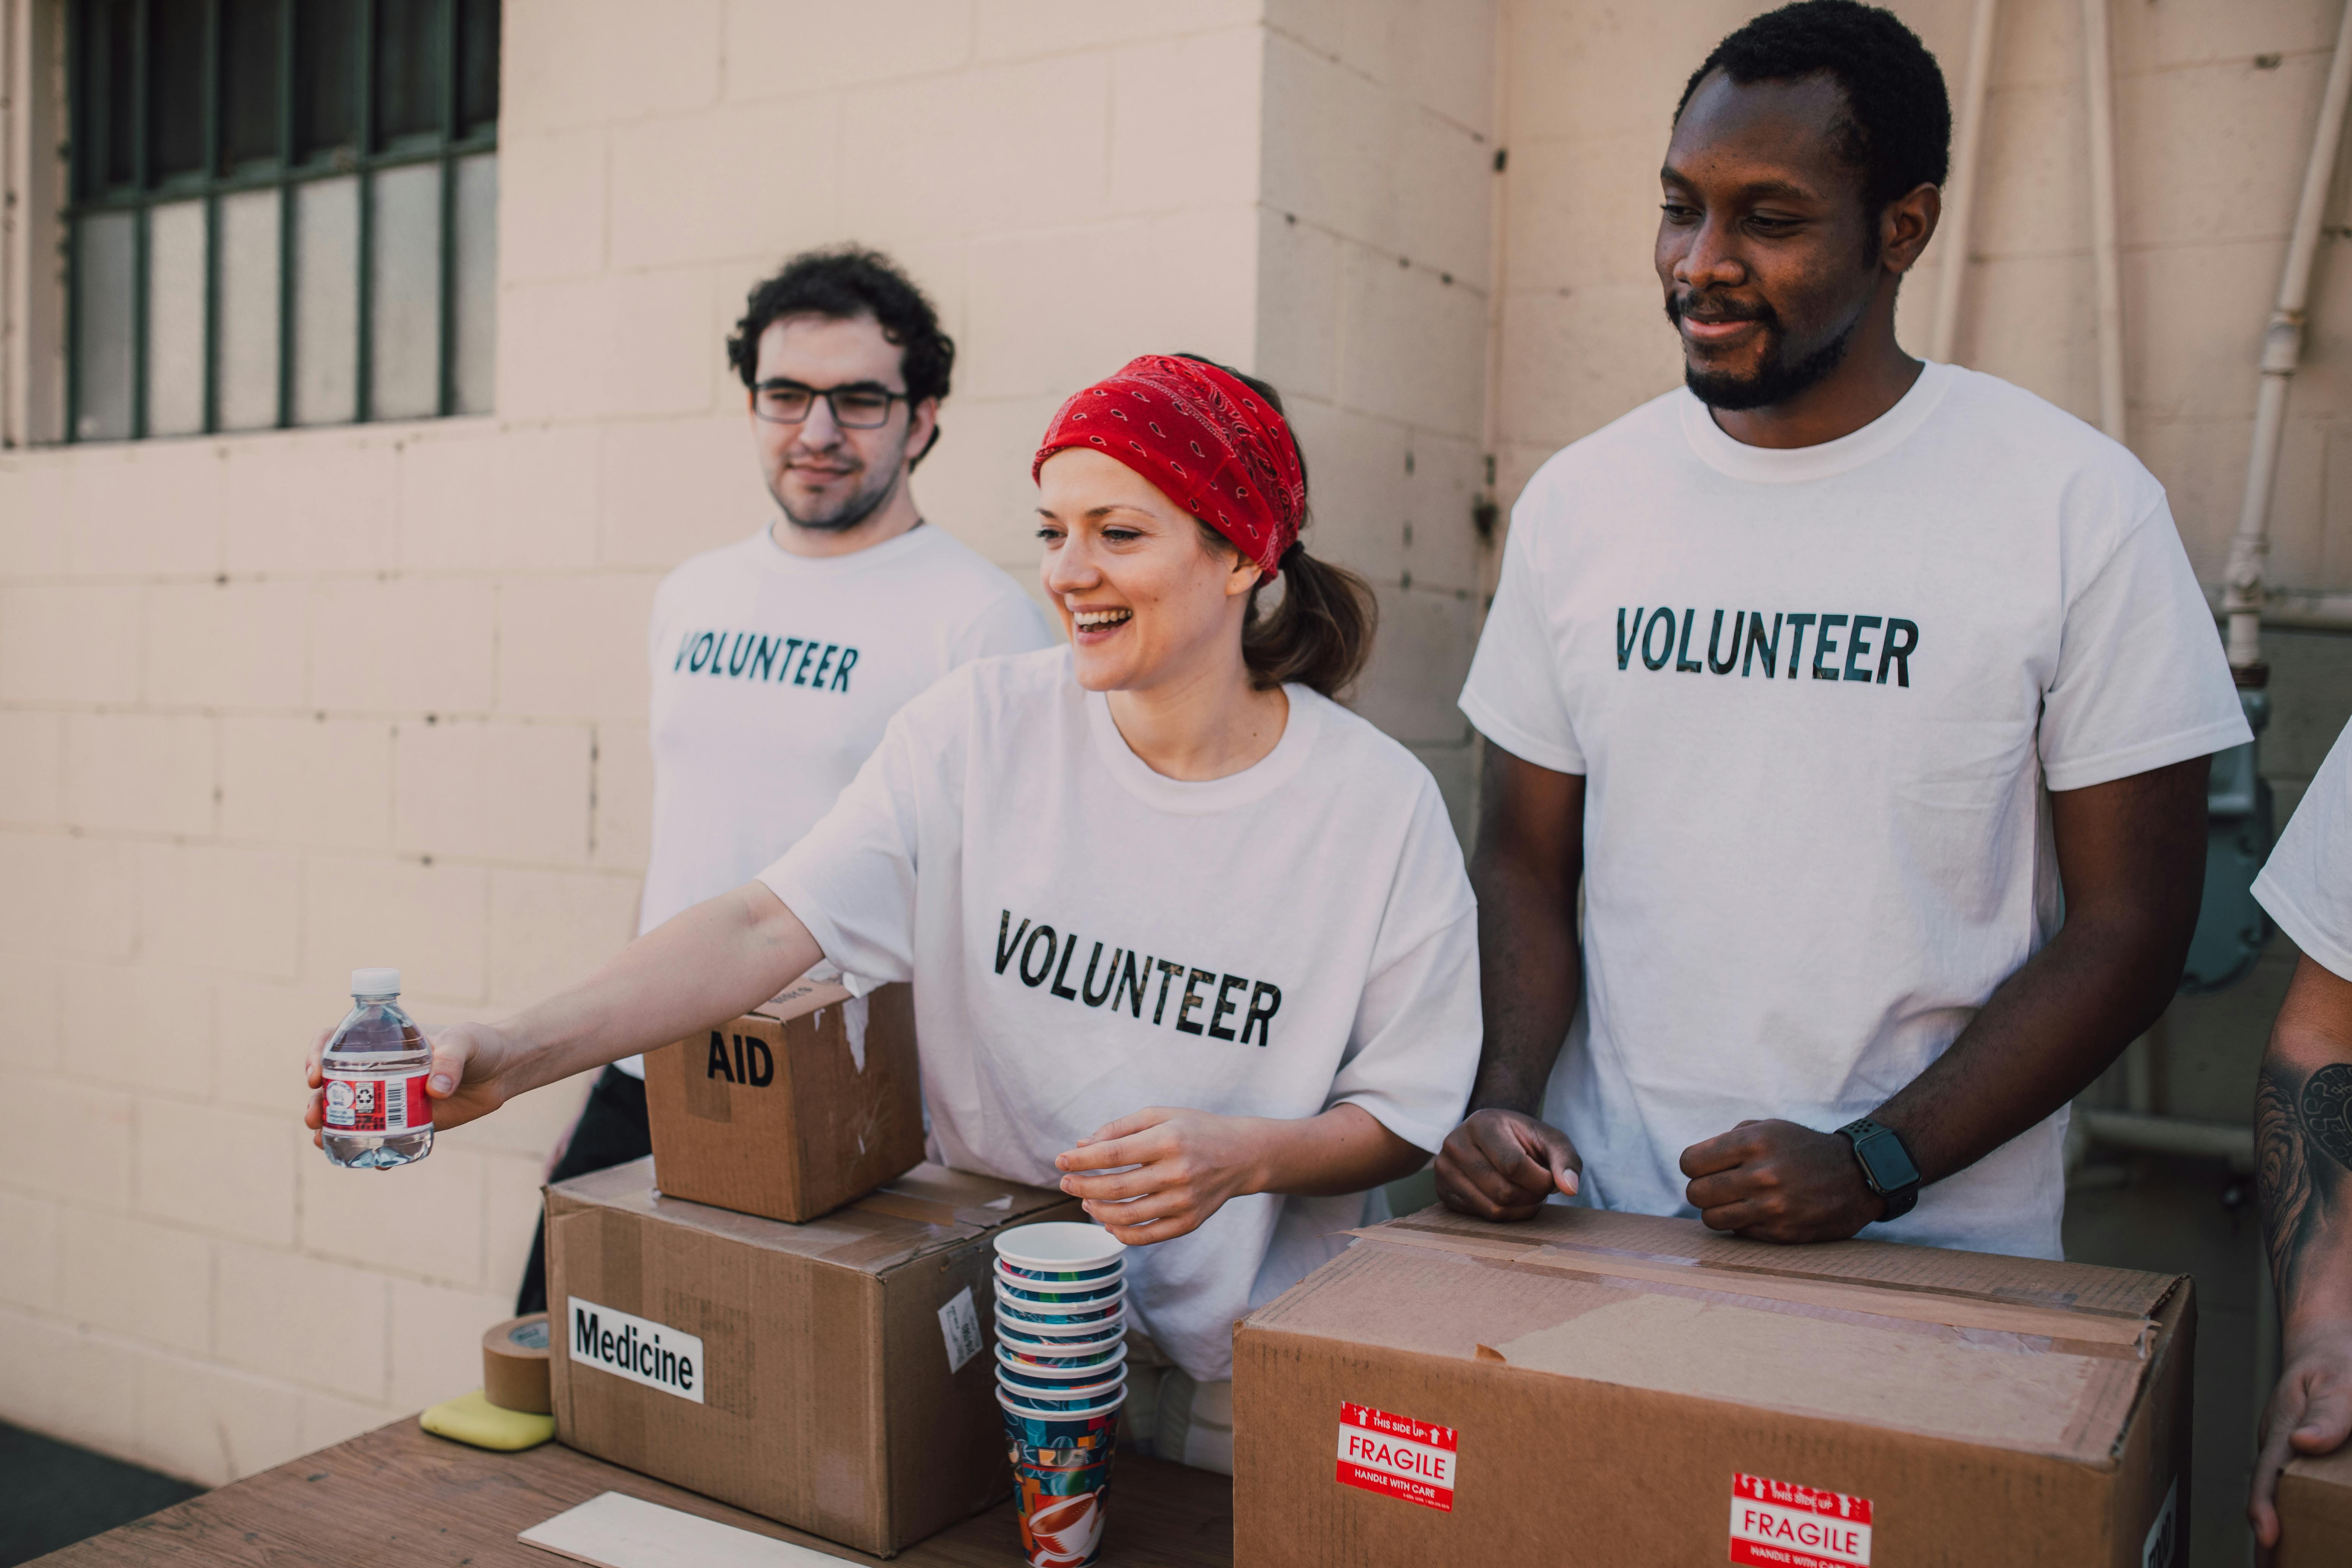 Volunteers handing out essentials at a community center | Source: Pexels